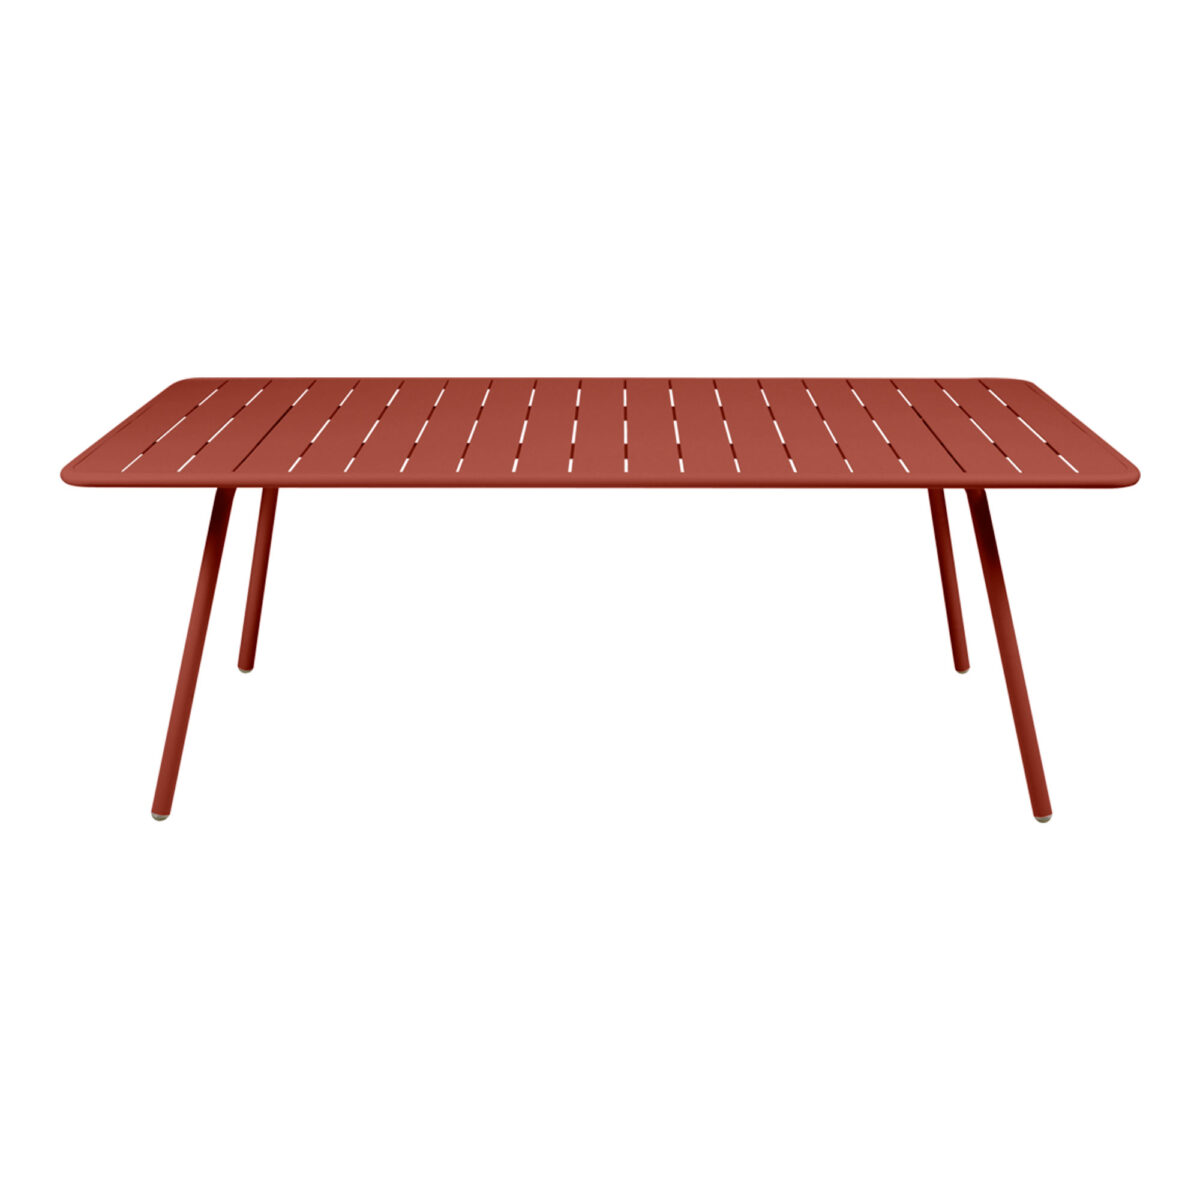 Luxembourg Table 207x100 cm Red Ochre 20